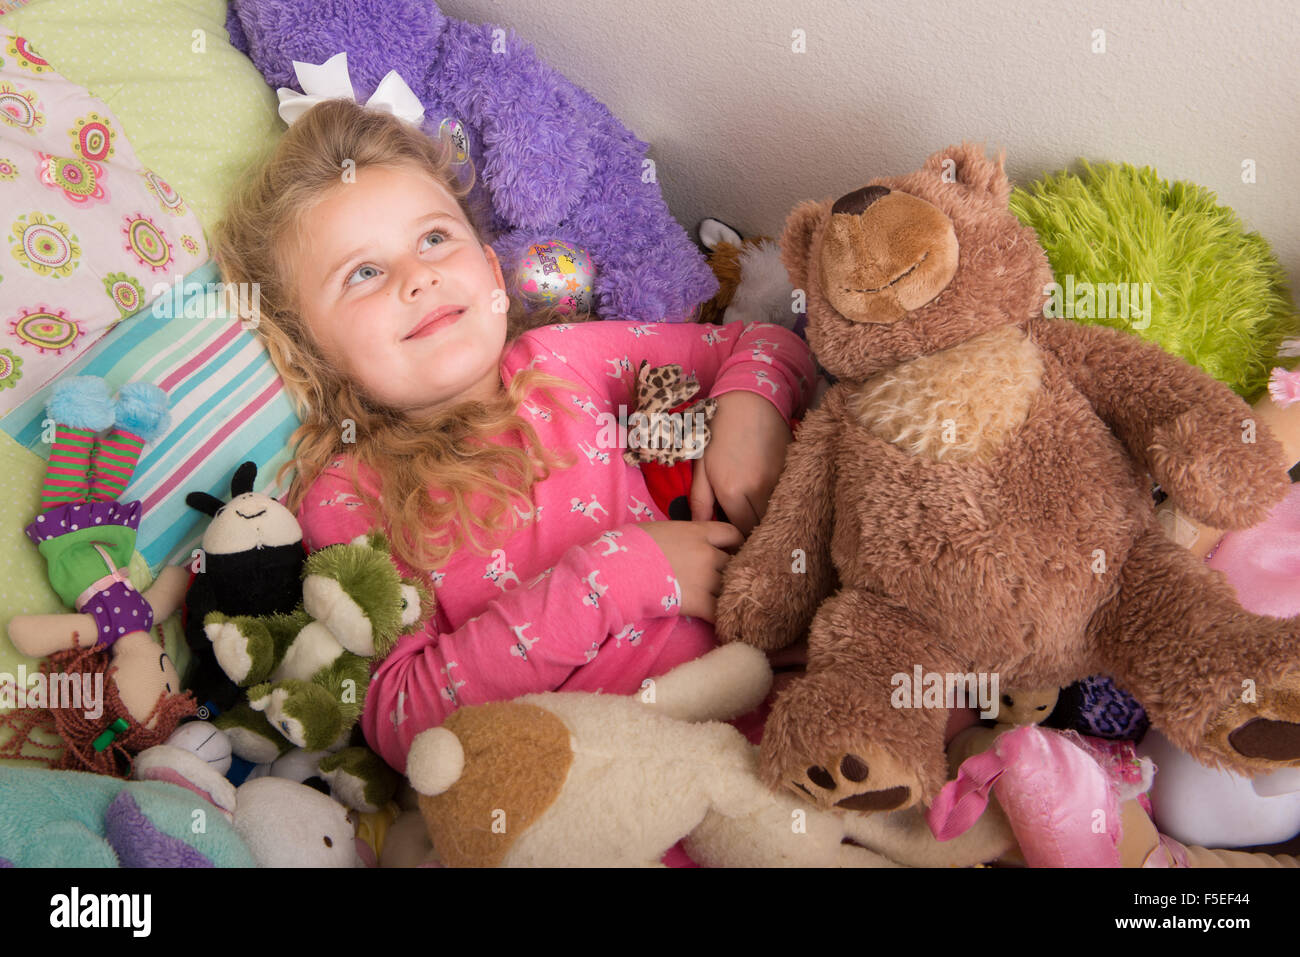 Girl lying on bed, surrounded by cuddly toys Stock Photo